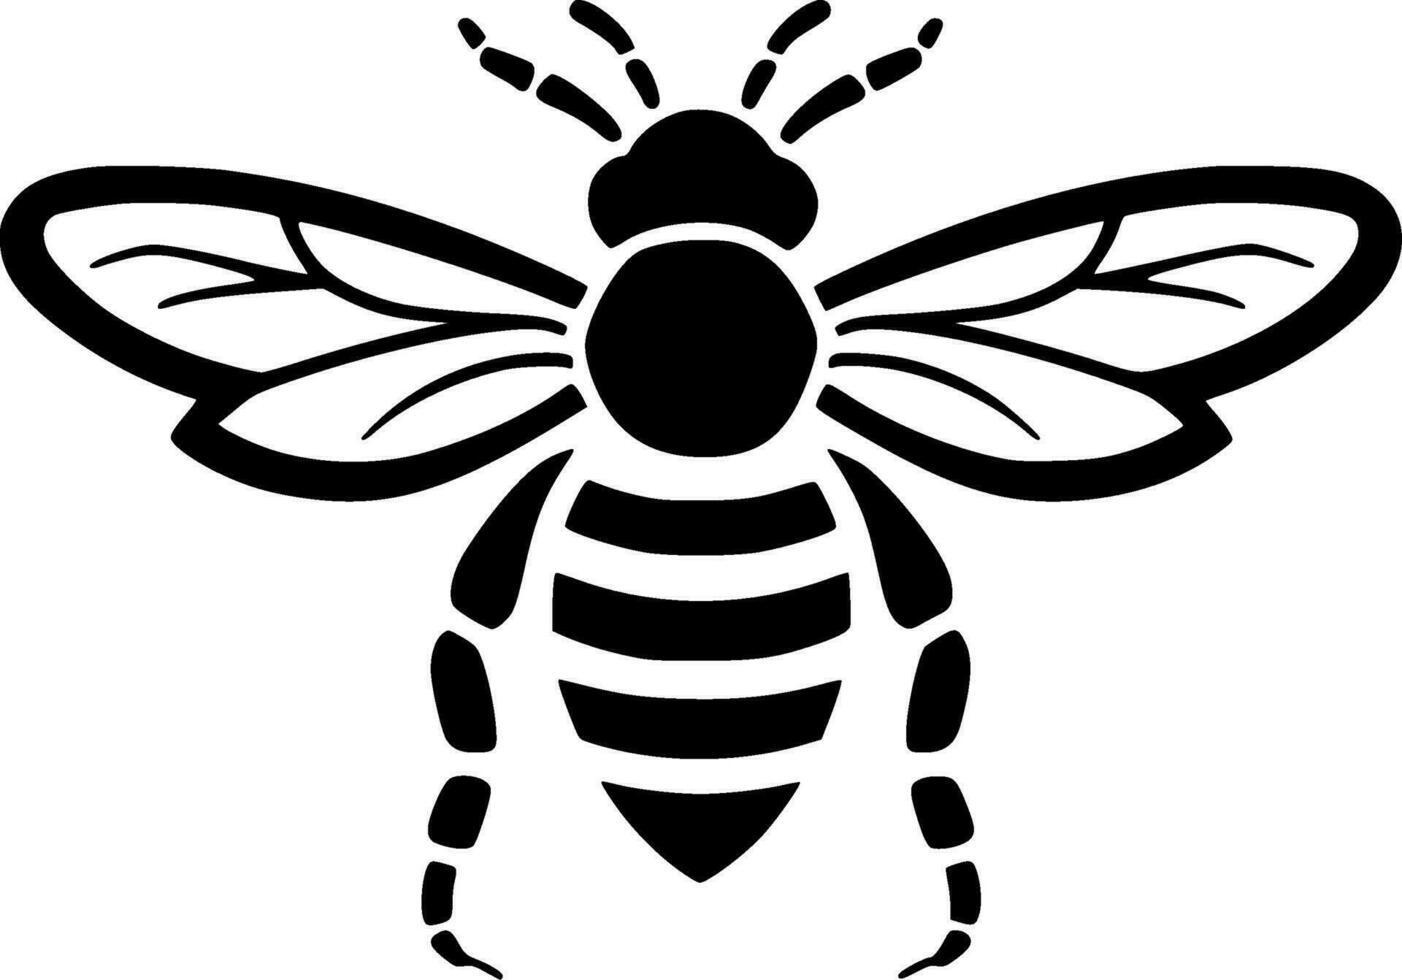 Bee - High Quality Vector Logo - Vector illustration ideal for T-shirt graphic